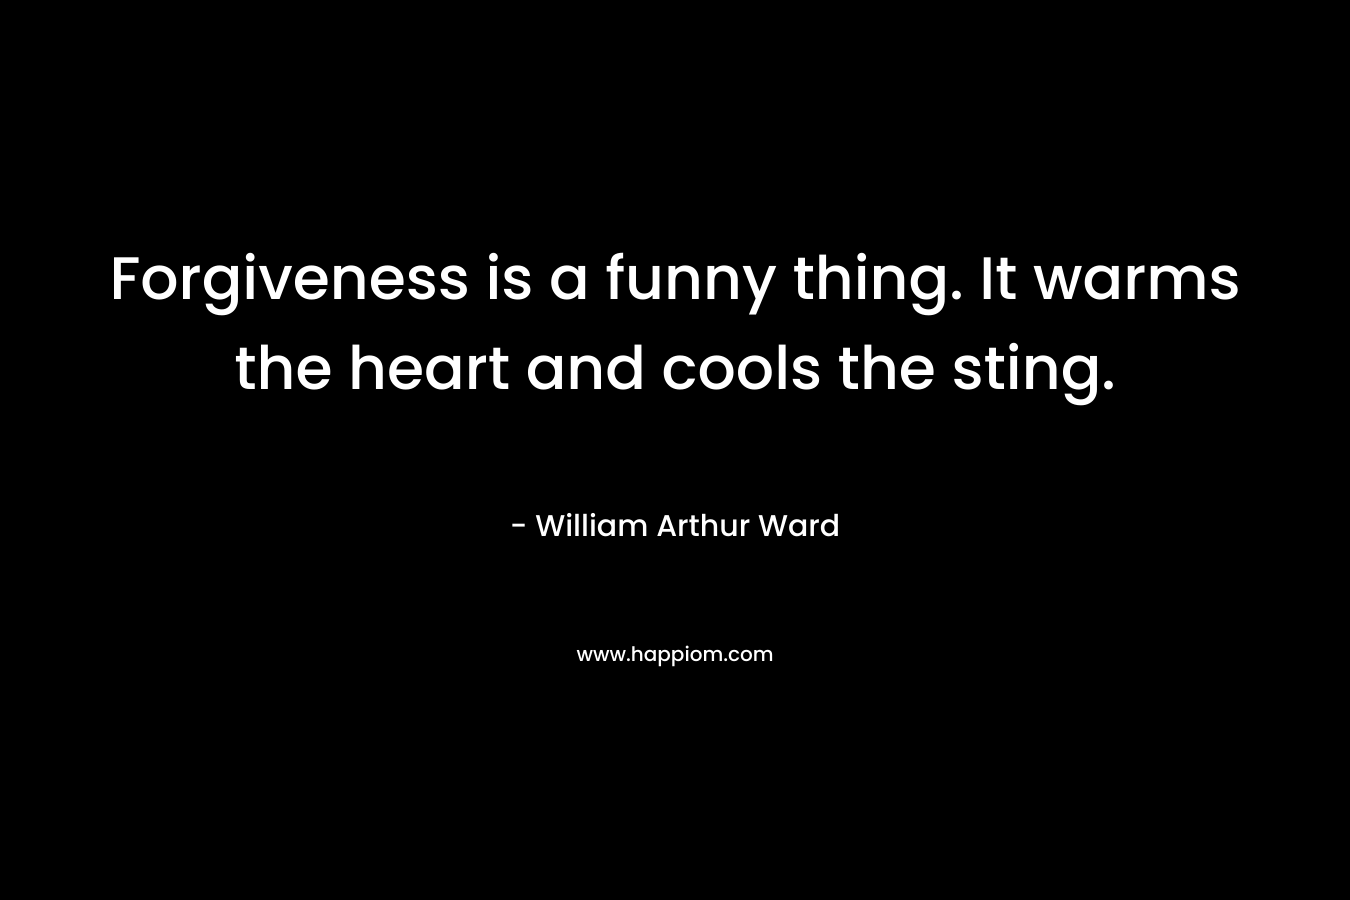 Forgiveness is a funny thing. It warms the heart and cools the sting. – William Arthur Ward